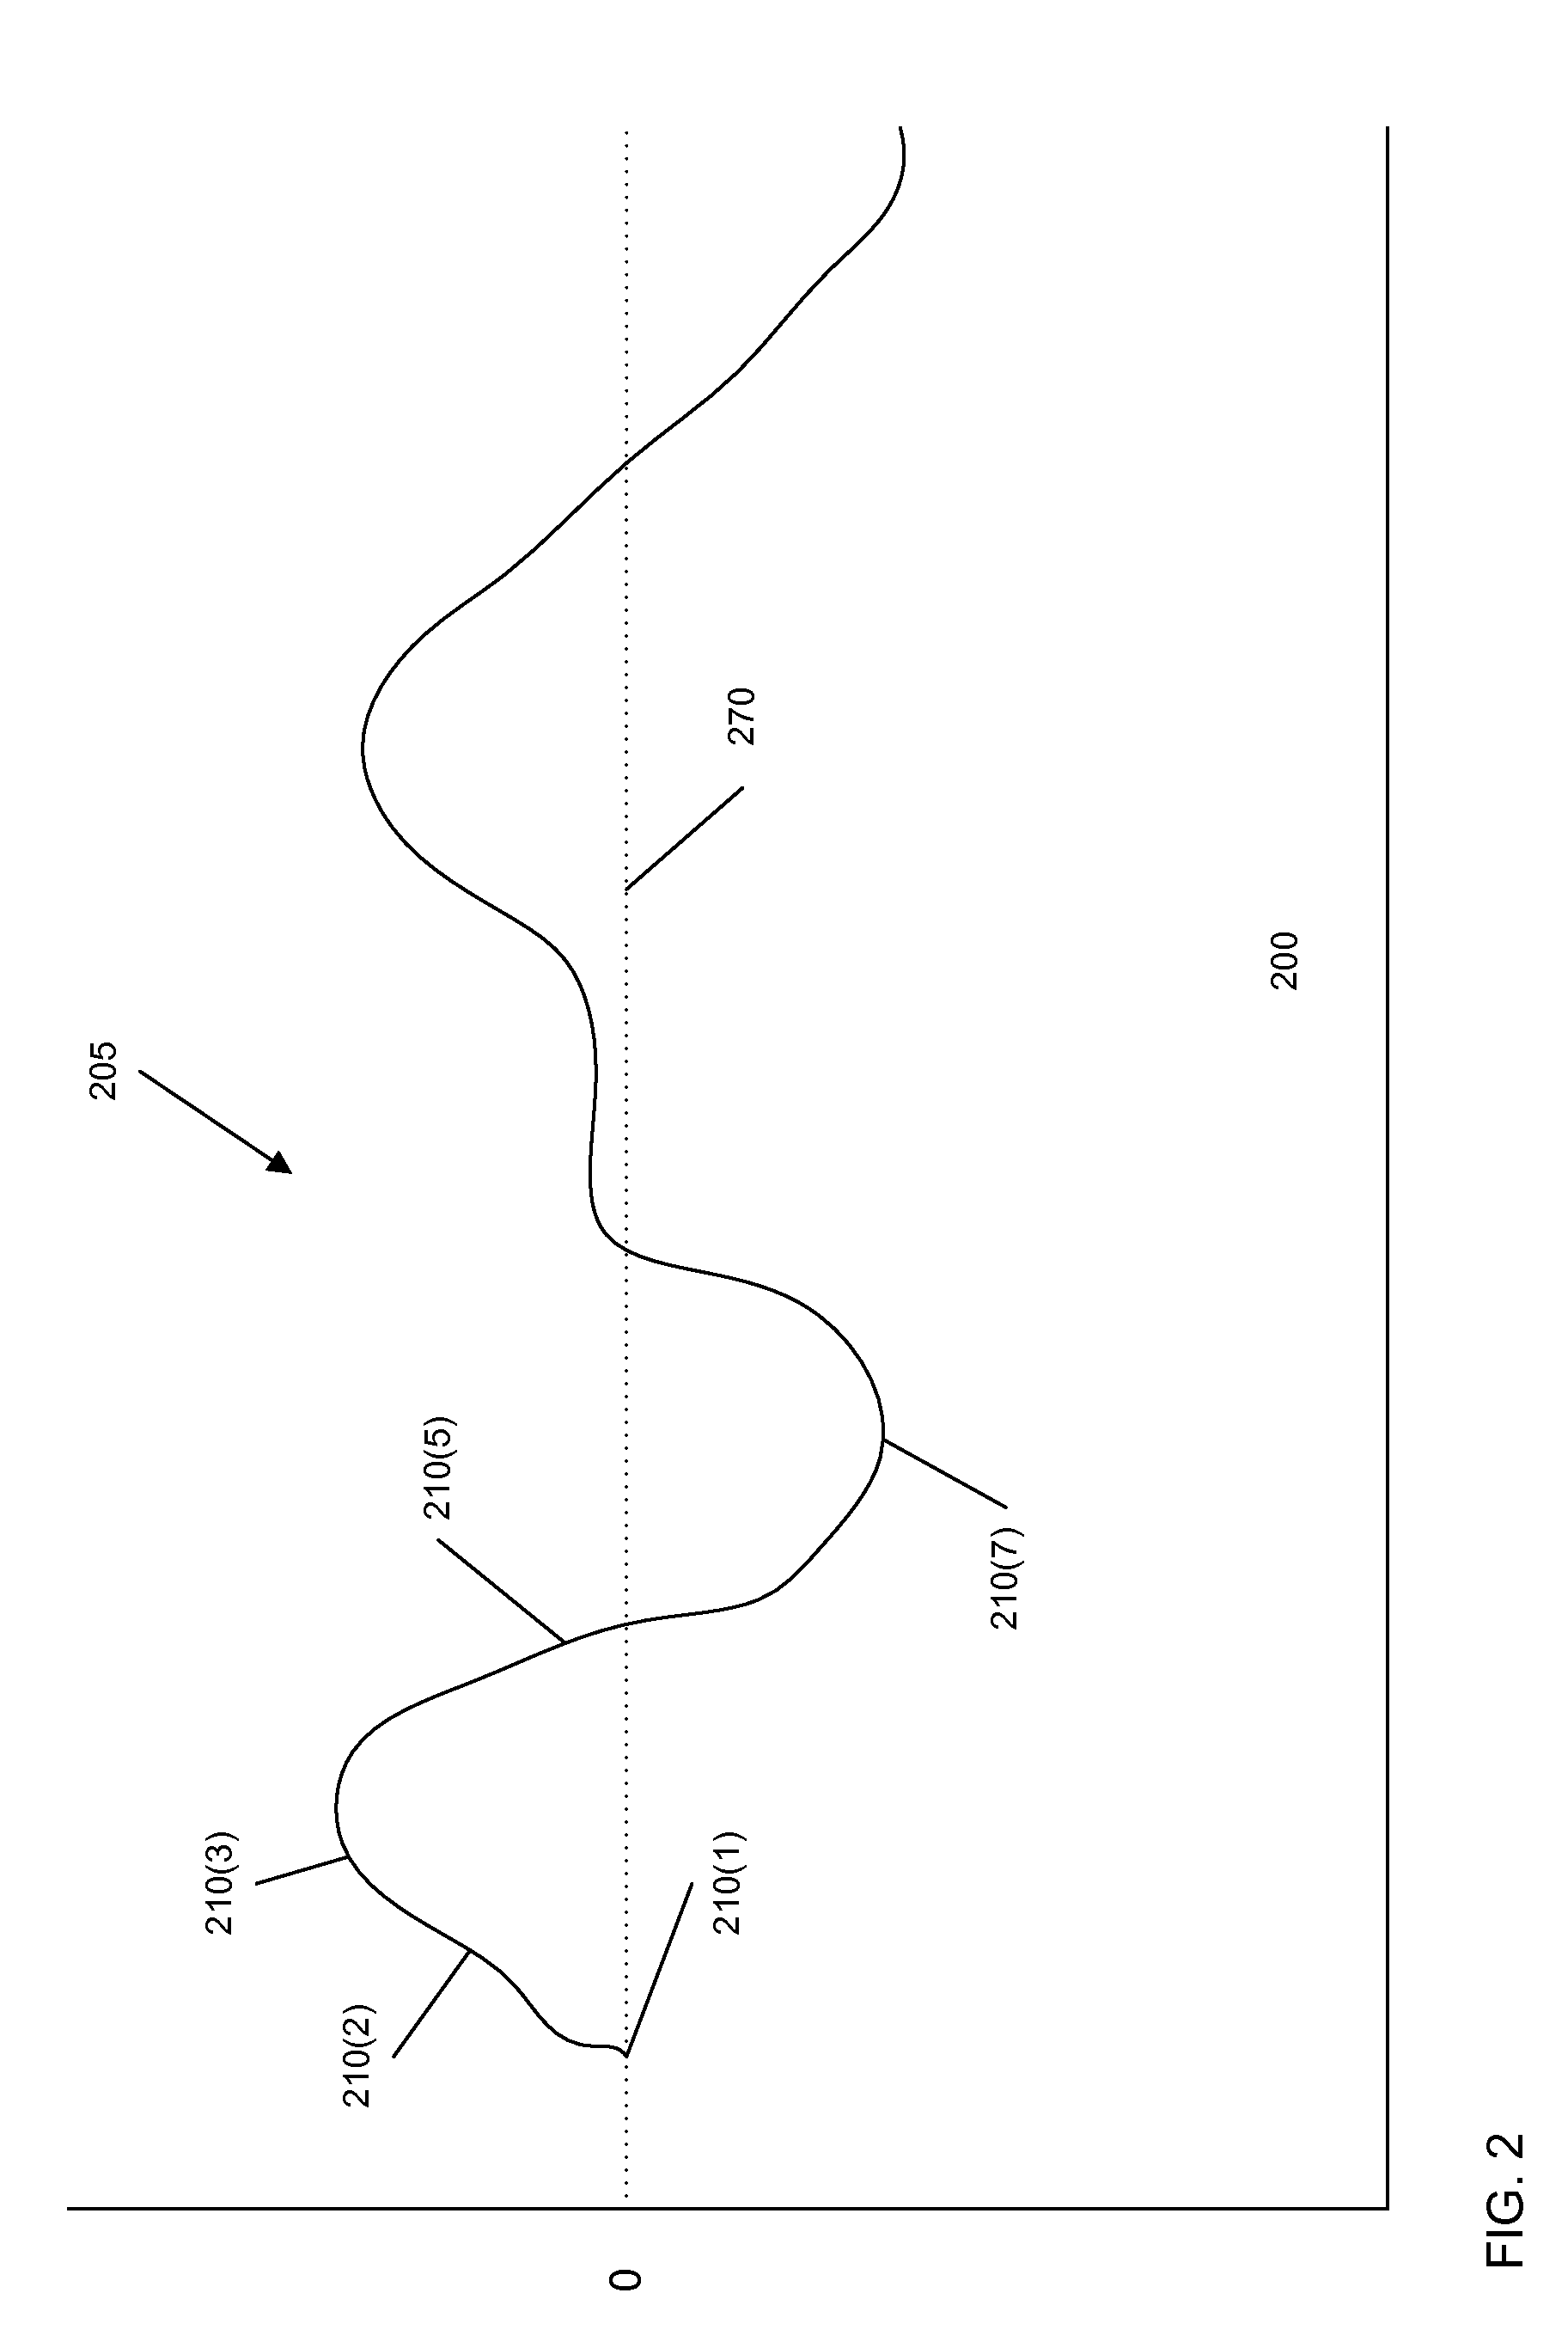 Updating of reference magnetic signature for authenticating a document with a magnetic stripe